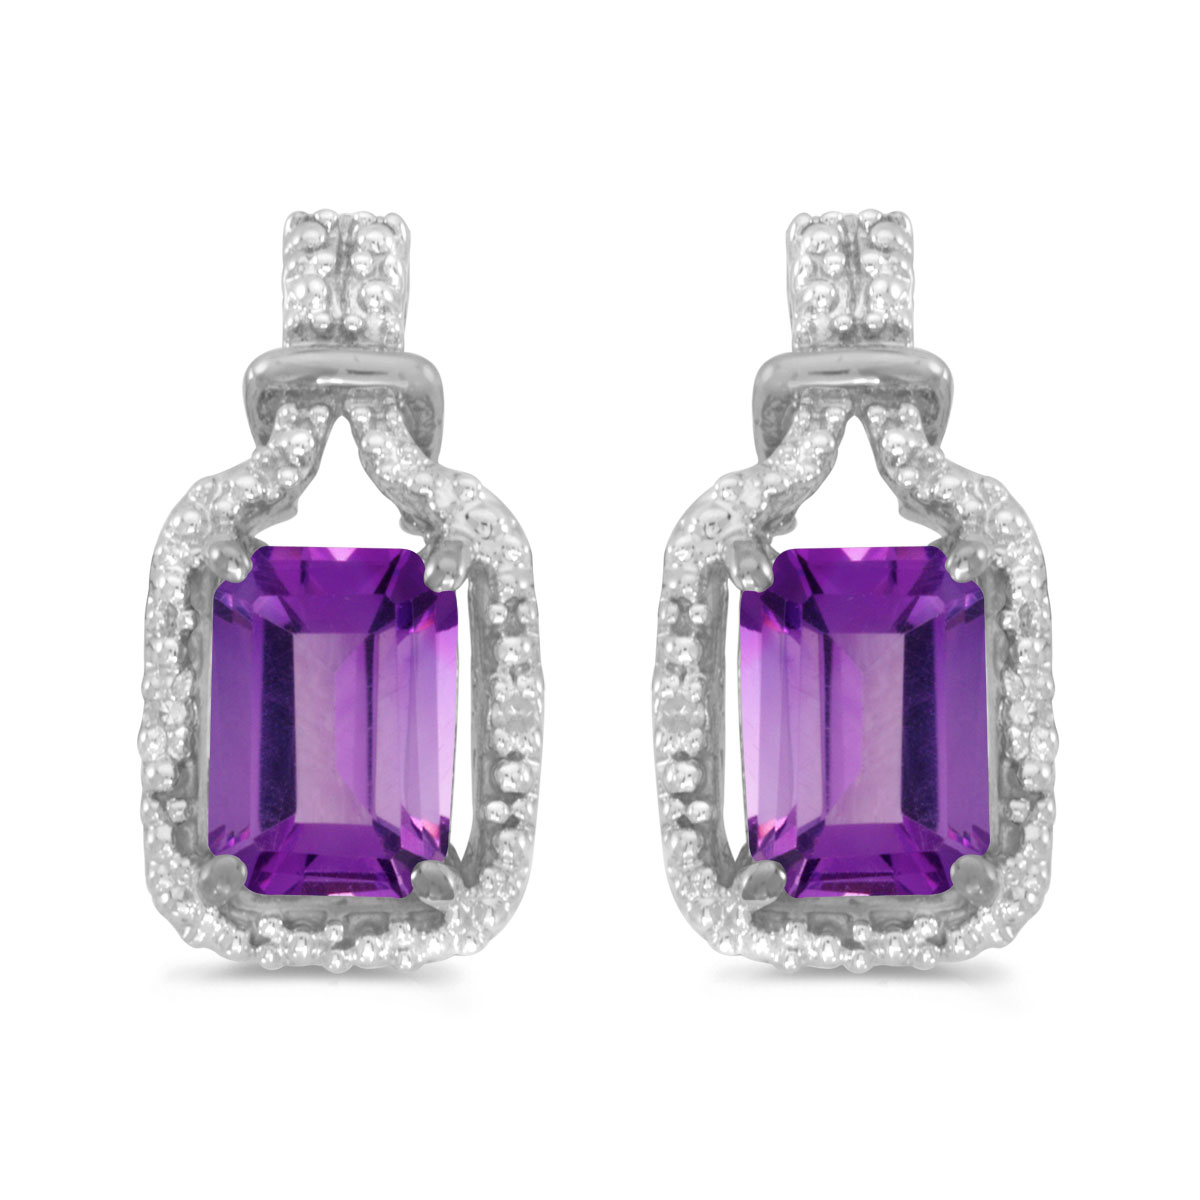 JCX2044: These 14k white gold emerald-cut amethyst and diamond earrings feature 7x5 mm genuine natural amethysts with a 1.54 ct total weight and sparkling diamond accents.